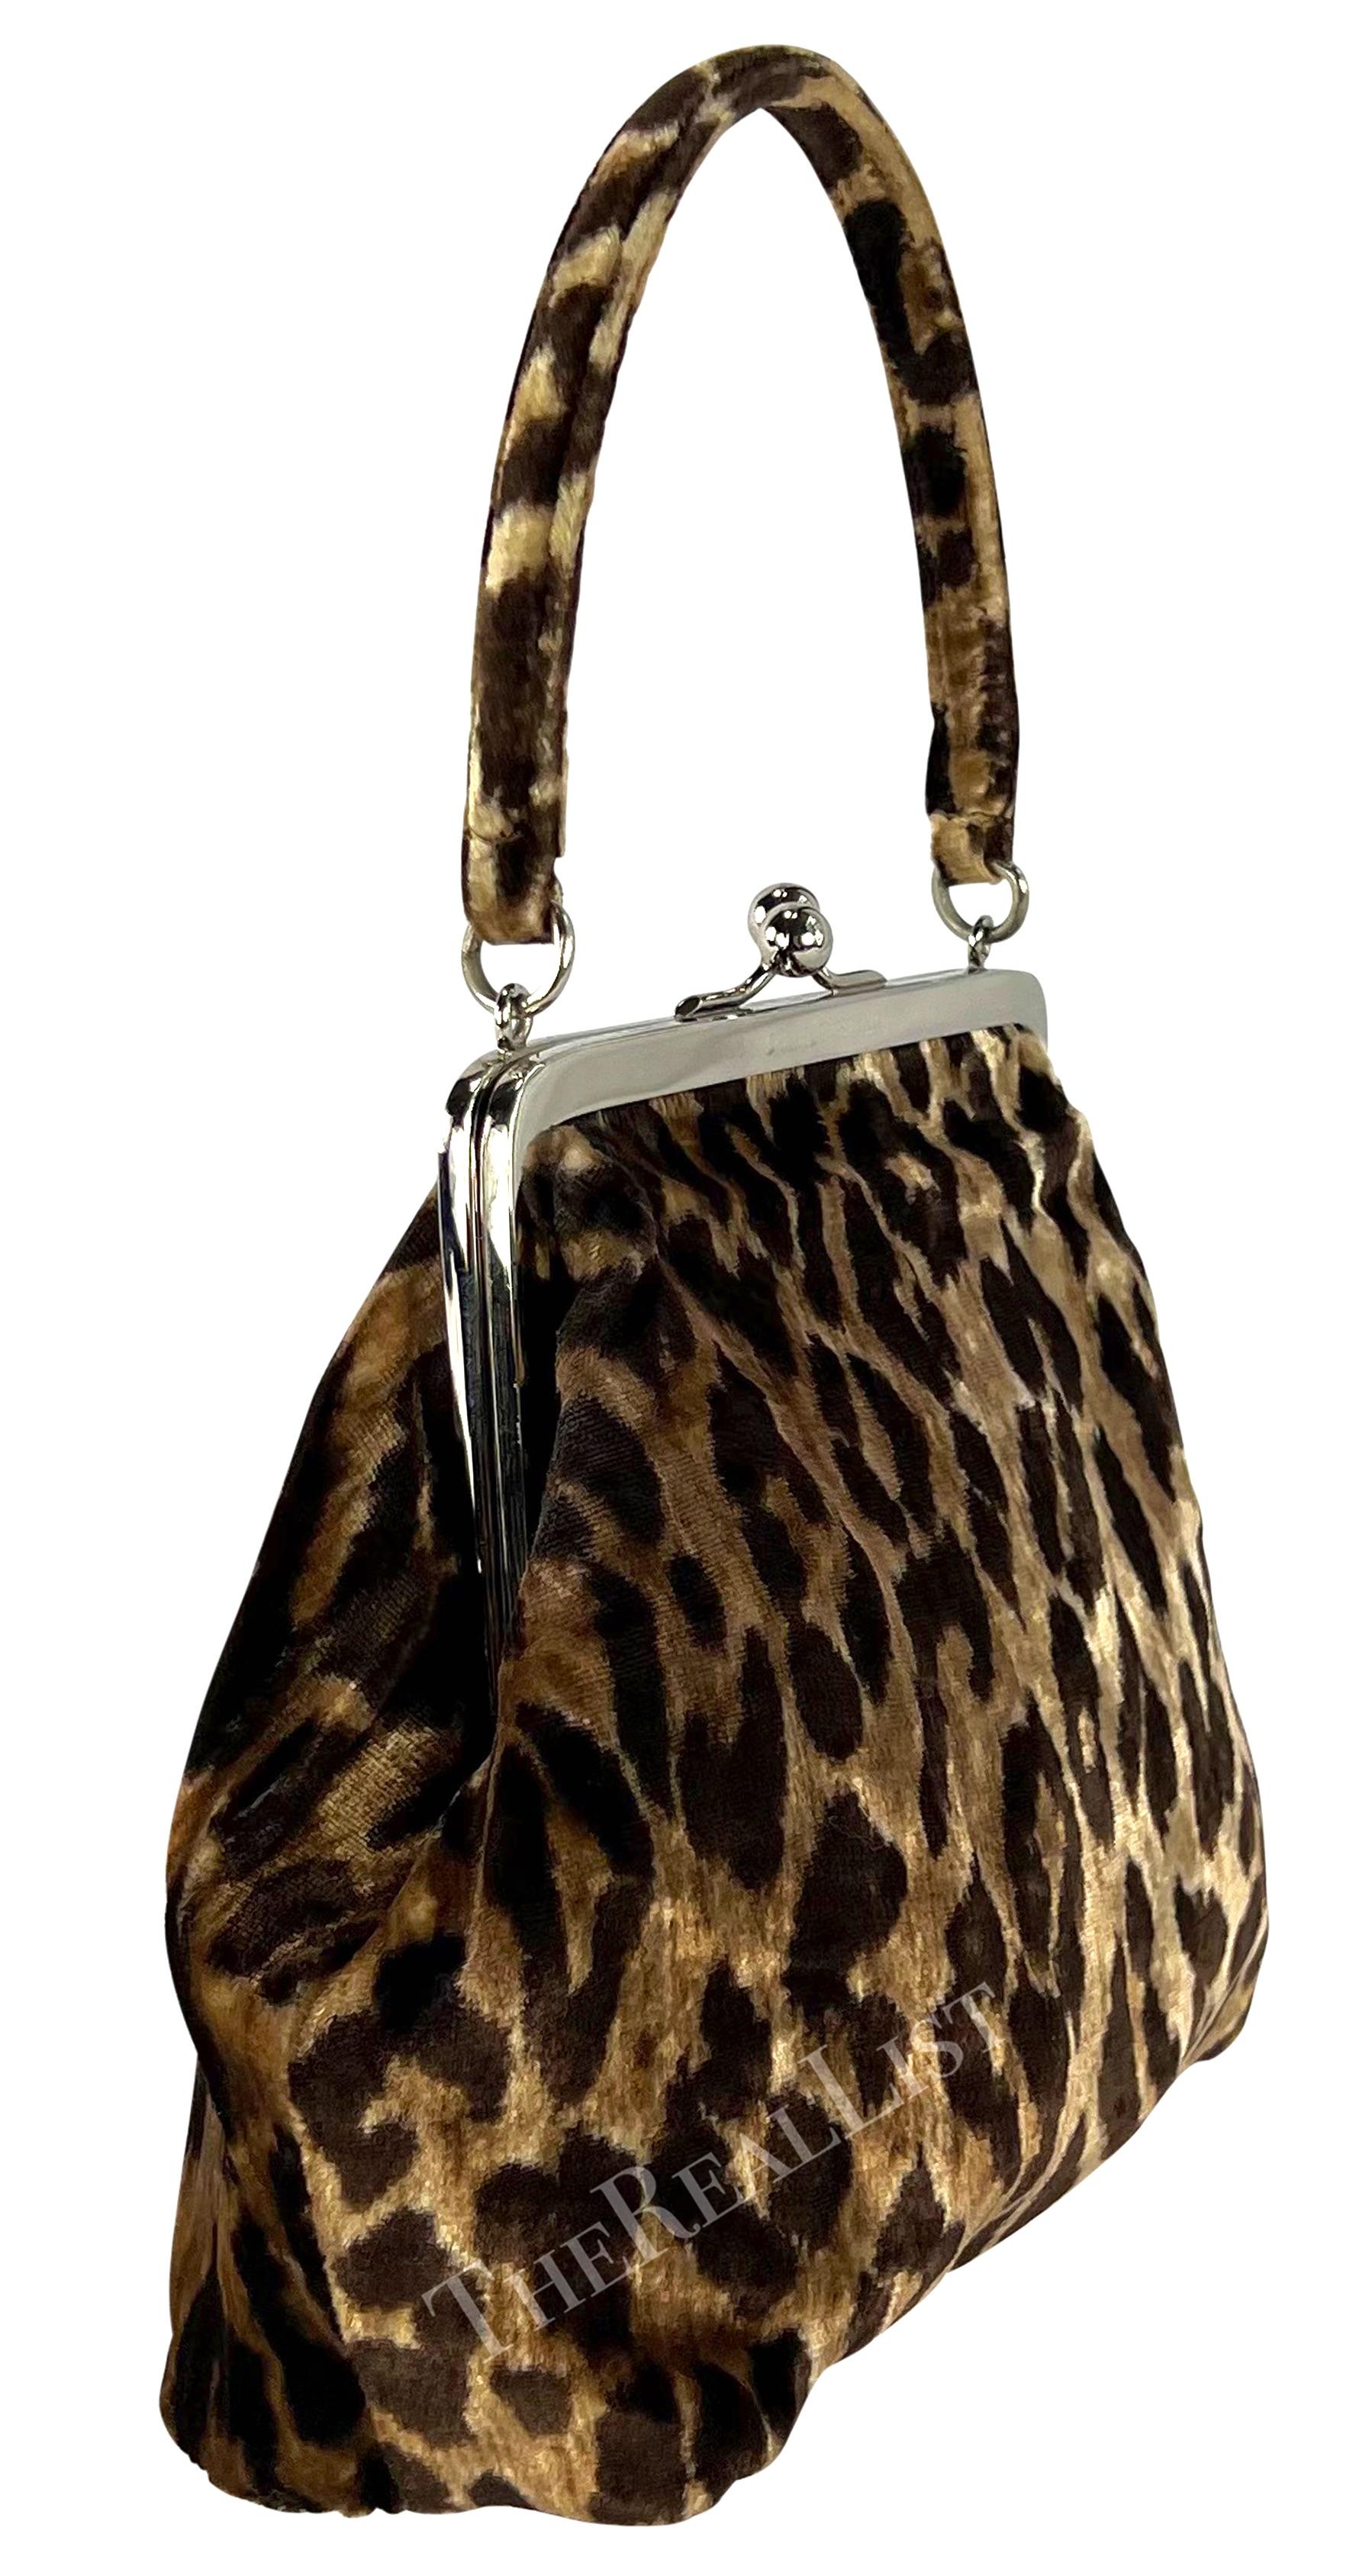 1990s Dolce & Gabbana Cheetah Velvet Top Handle Evening Bag In Good Condition For Sale In West Hollywood, CA